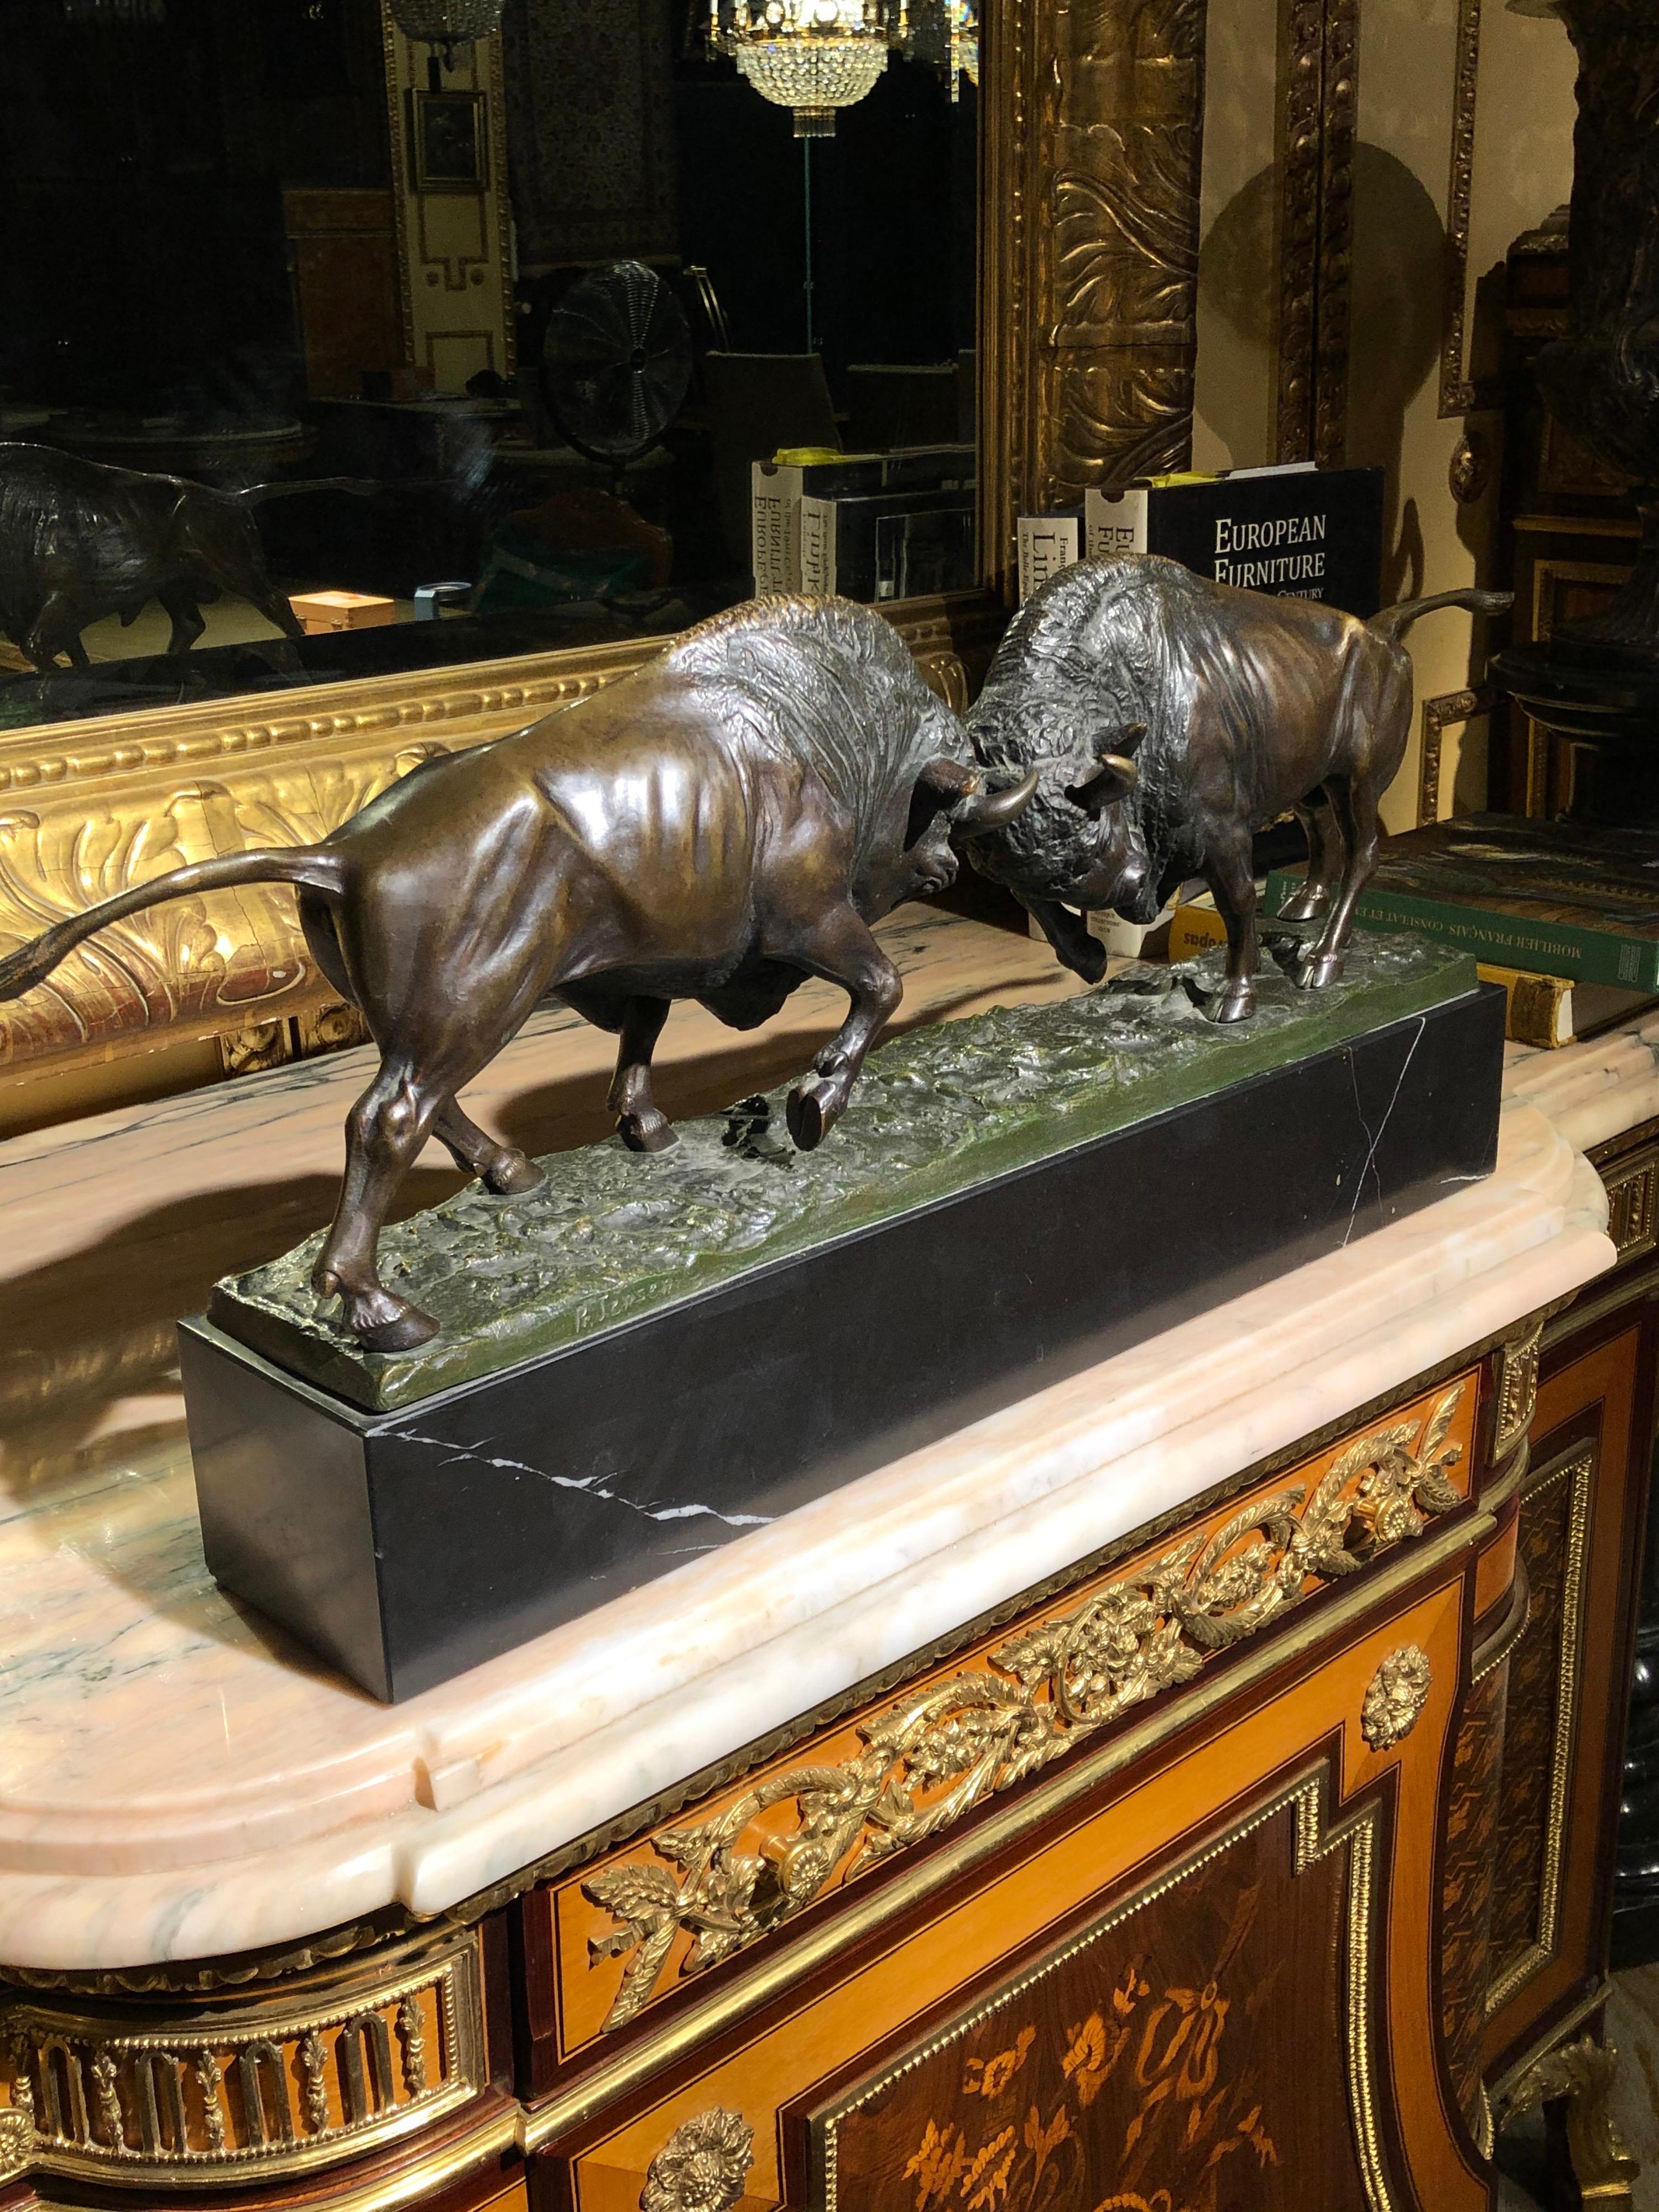 19th Century impressive bronze slave of Two fighting bisons , P. Jensen

impressive bronze slave of Two fighting bisons.
Fighting bison on tall rectangular marble pedestal. Tense posture in attack position. Bronze art castings. Extremely high